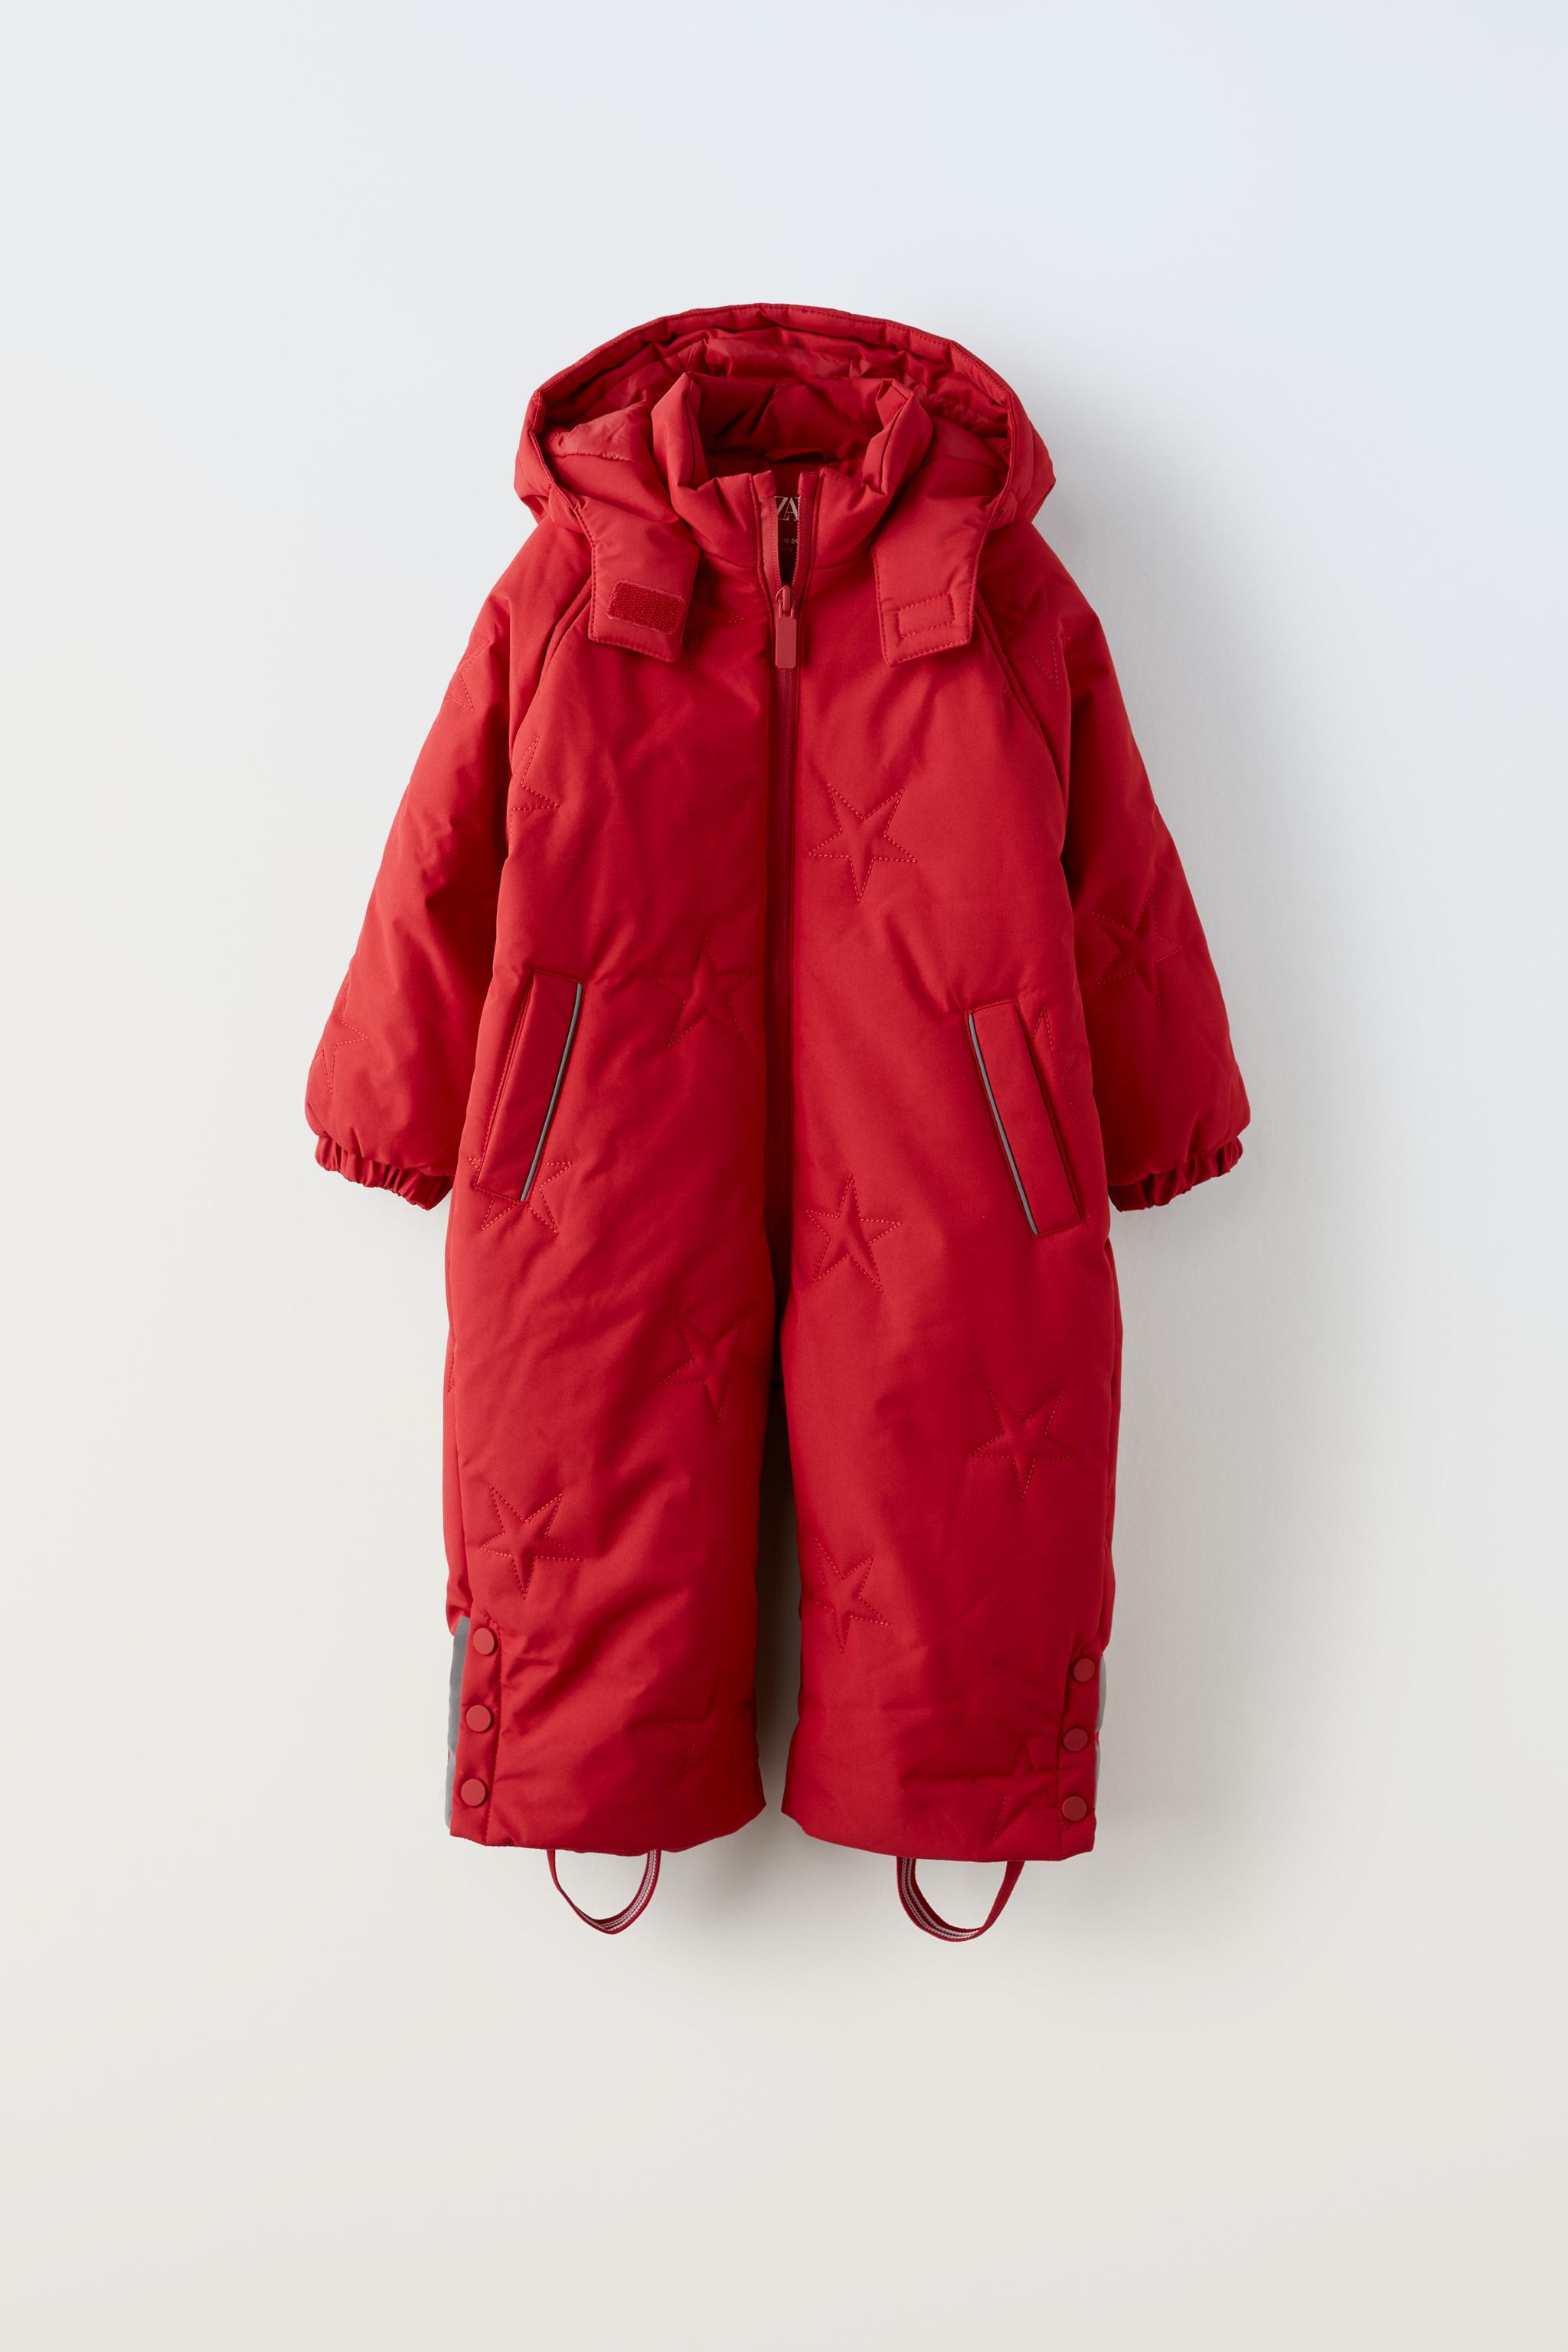 SKI COLLECTION キルティング WATER-REPELLENT AND WIND-PROTECTION